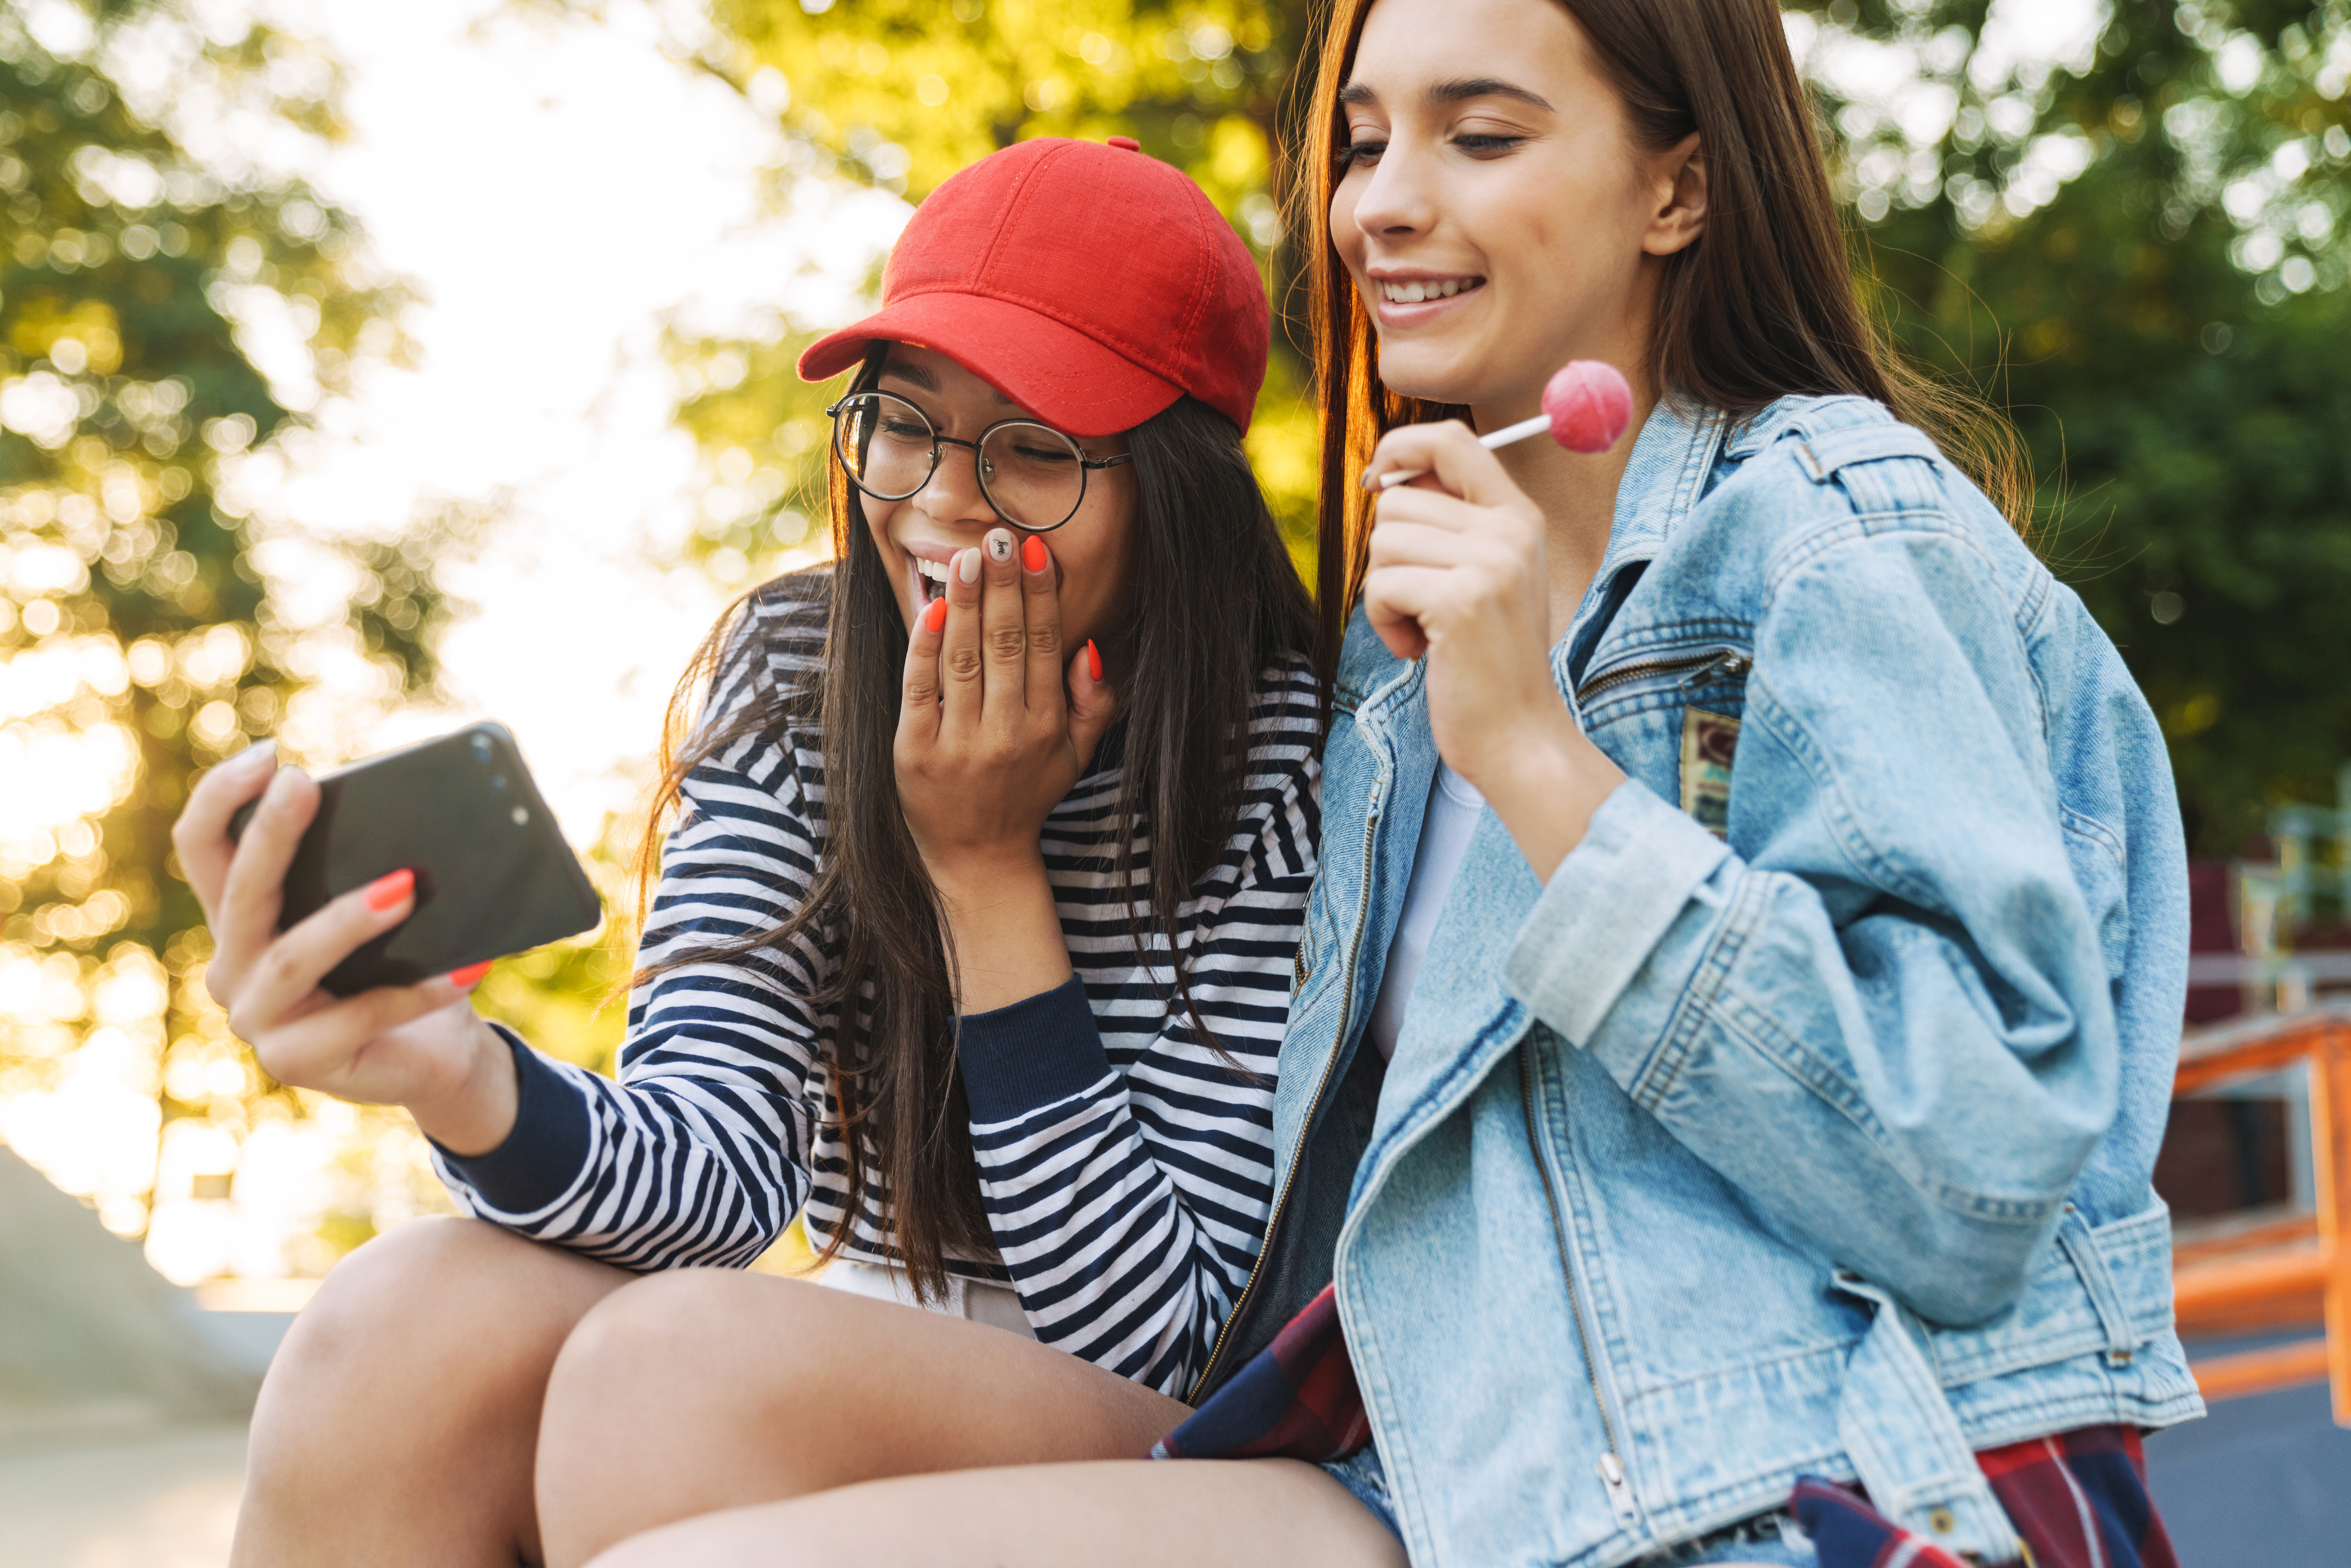 Two girls smiling while looking at a phone